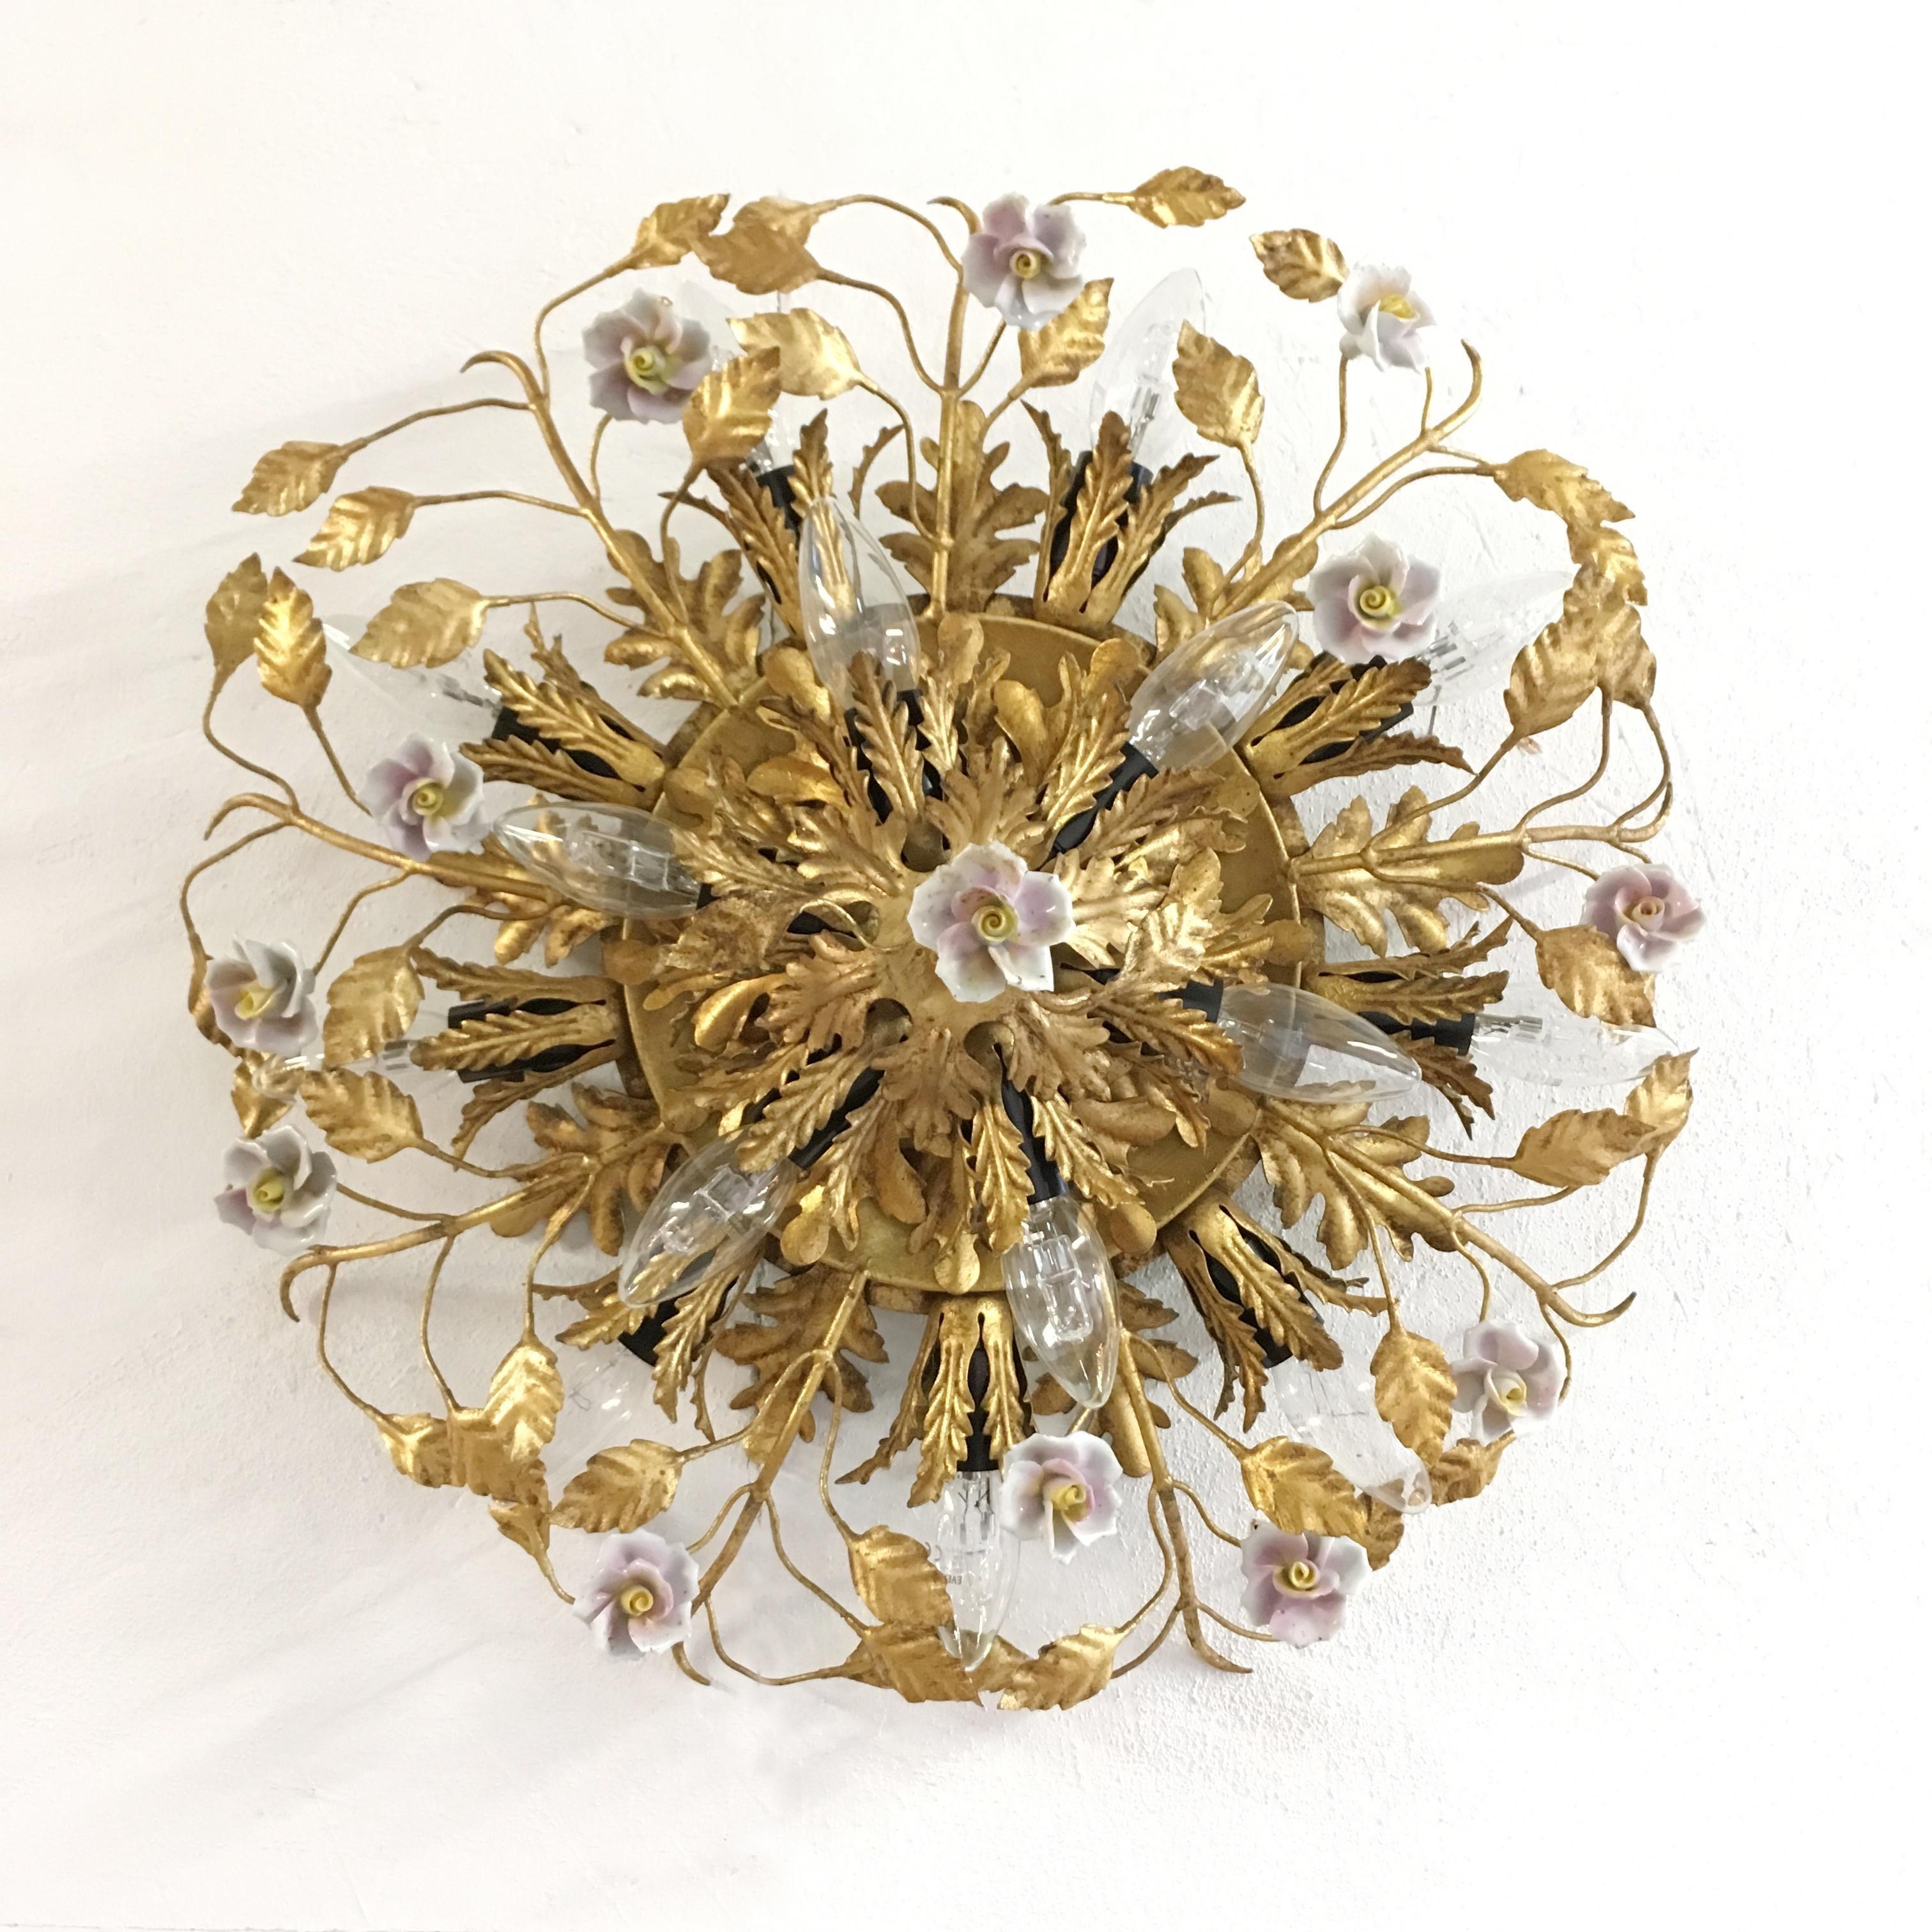 Italian Florentine flush mount ceiling light
Beautiful gilt acanthus leaf double layered flush light, with winding gilt stems, small gilt leaves and beautiful handcrafted porcelain flowers in pale pink
Banci Firenze, Italy,
1950s original